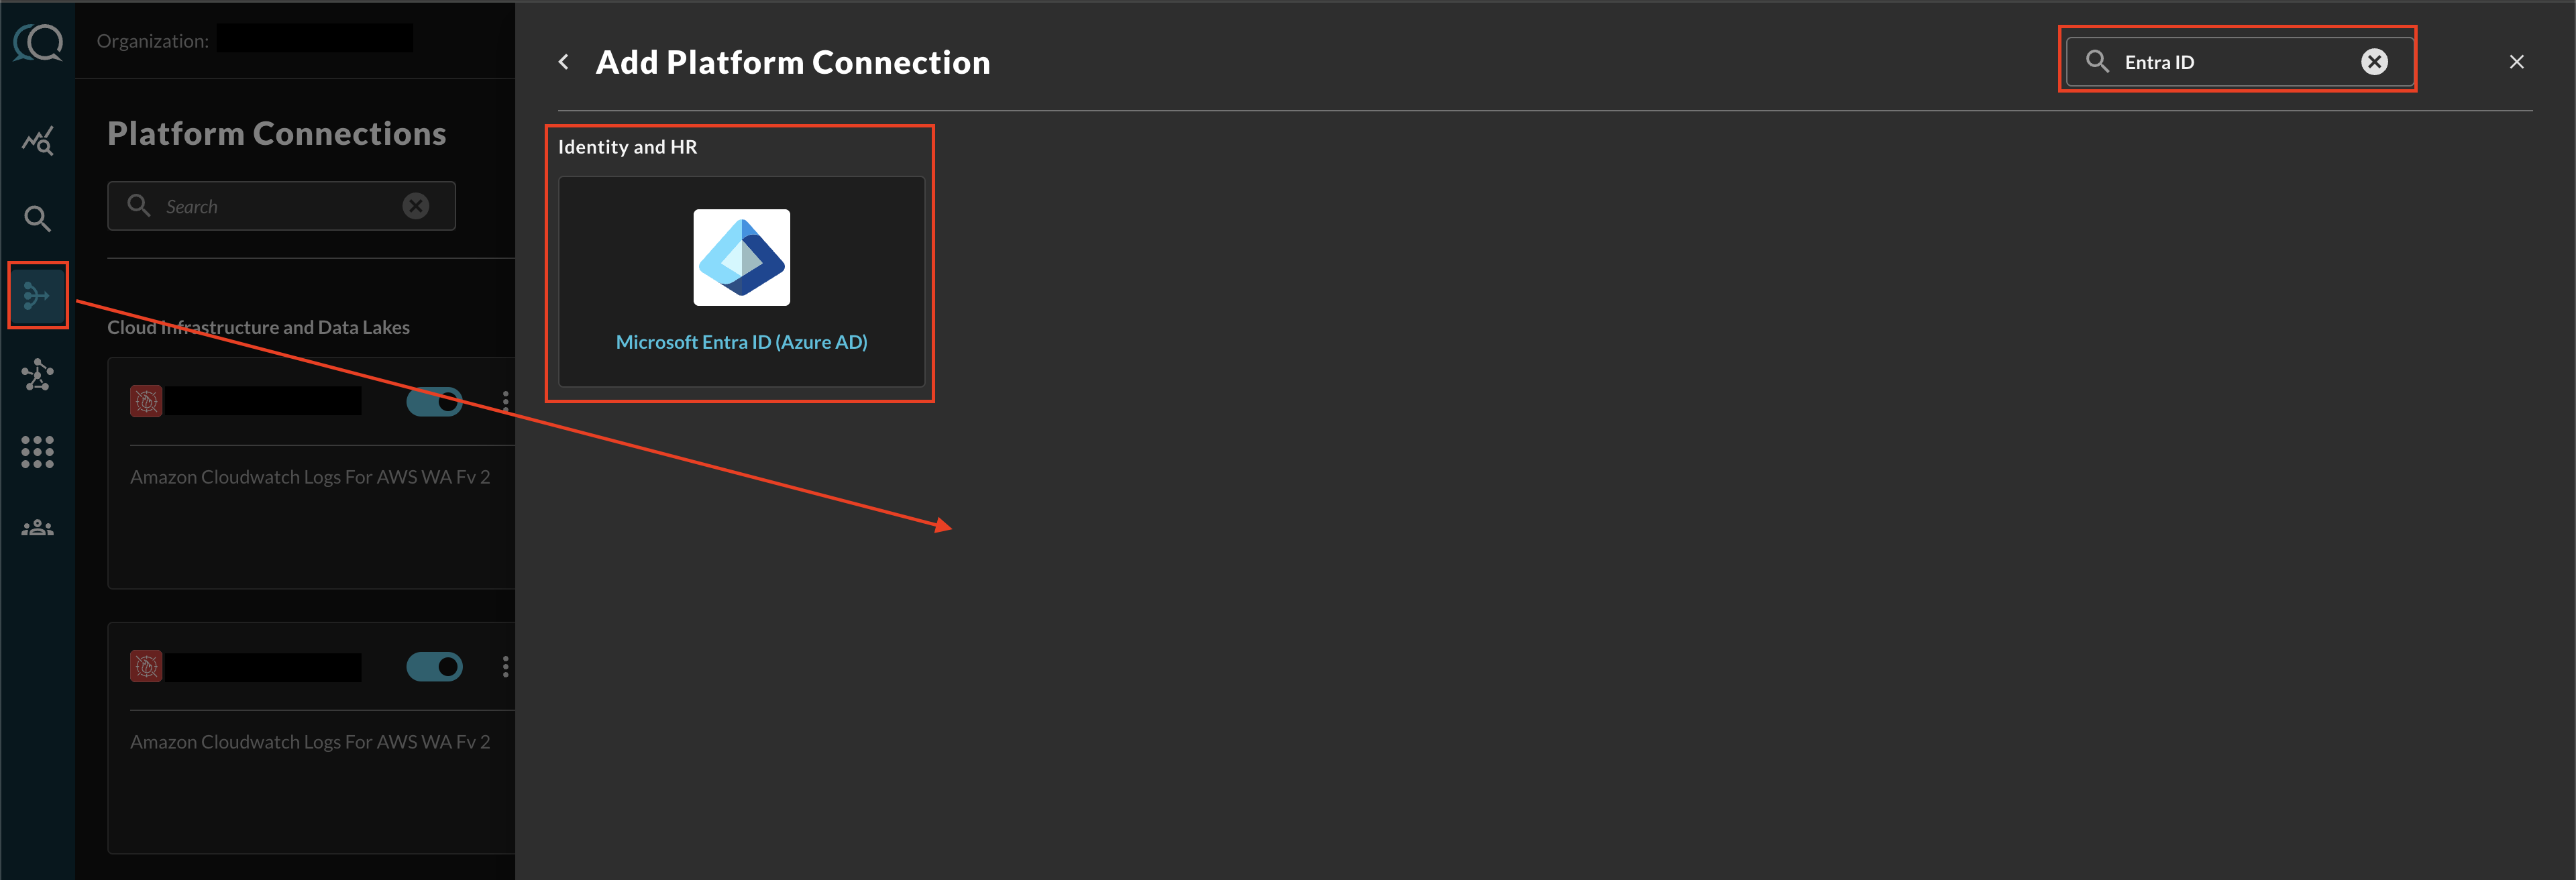 FIG. 2 - Locating the Microsoft Entra ID (Azure AD) Platform Connector